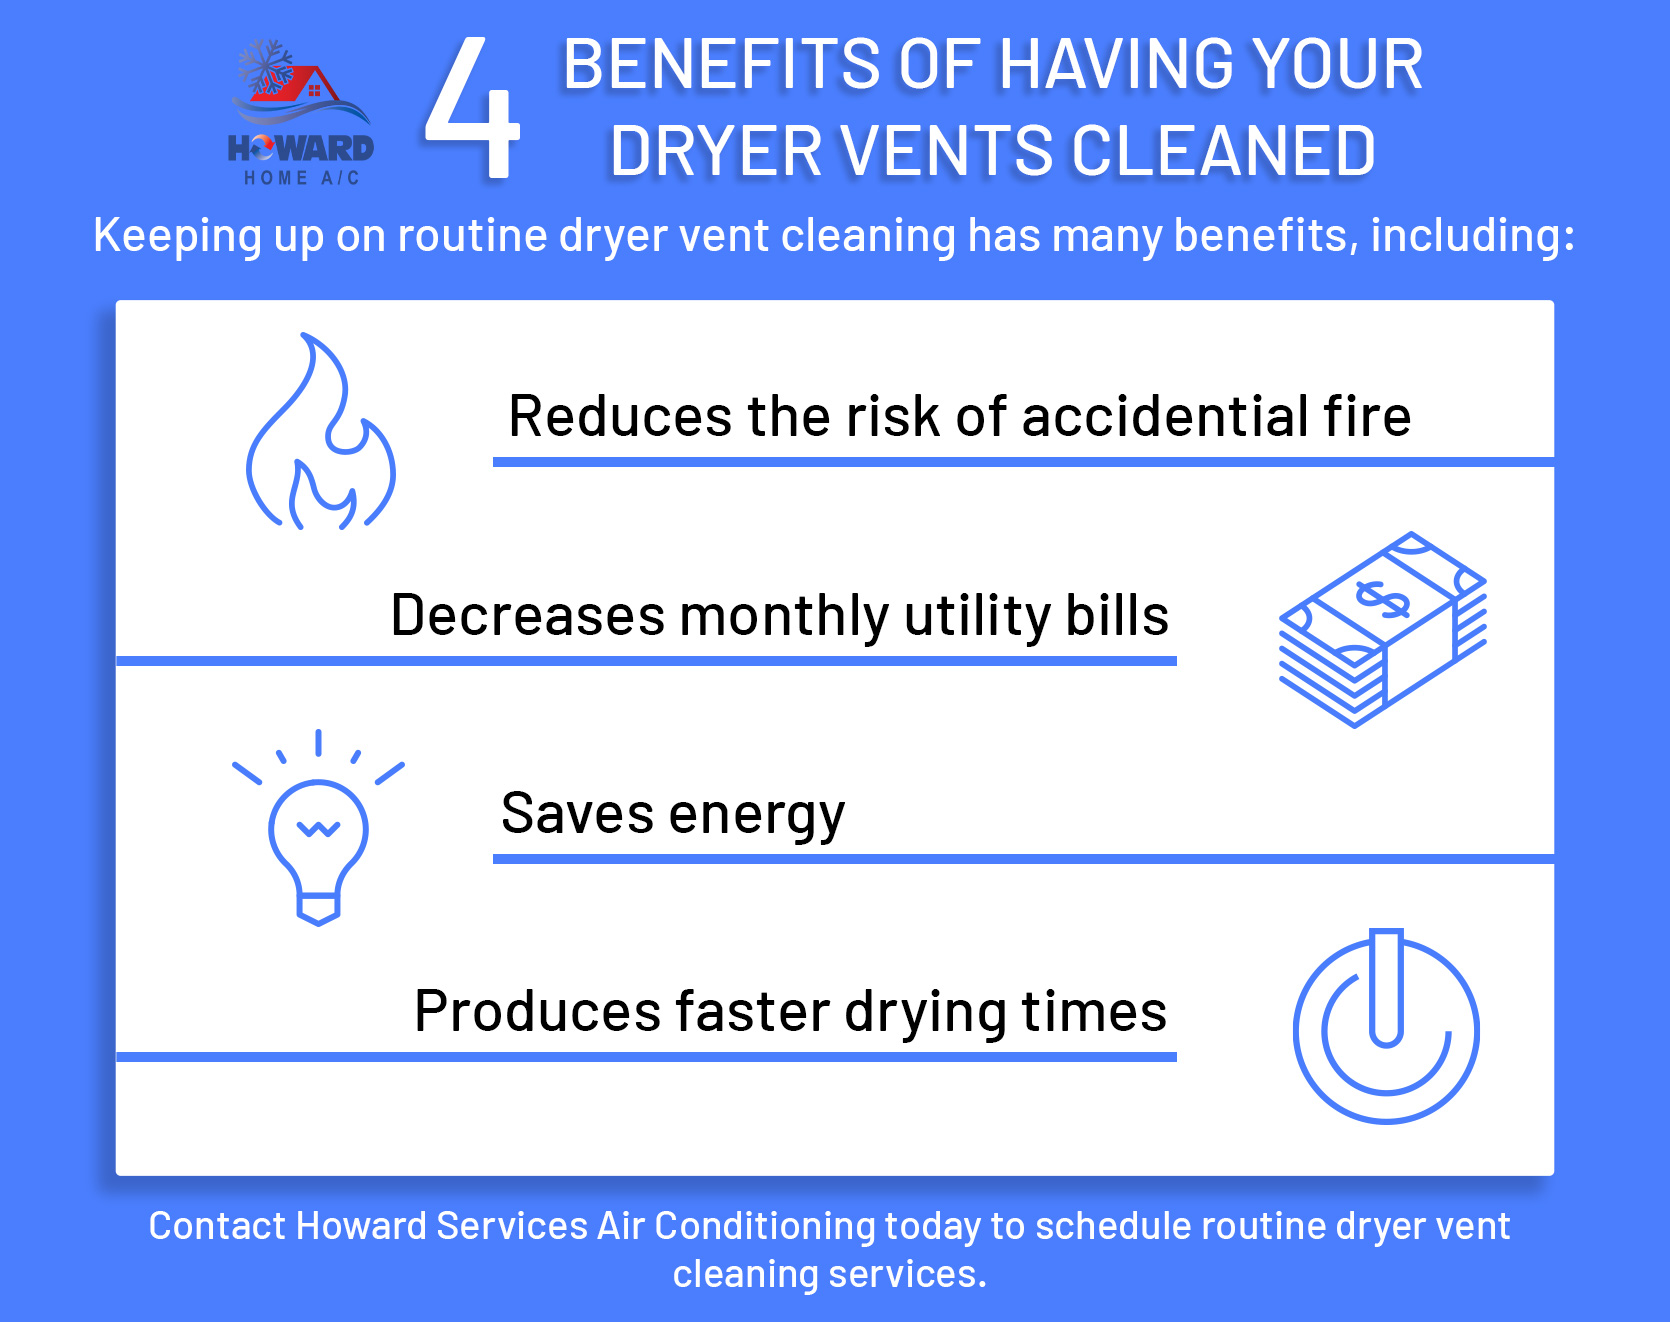 4-Benefits-Of-Having-Your-Dryer-Vents-Cleaned-5f03812186178